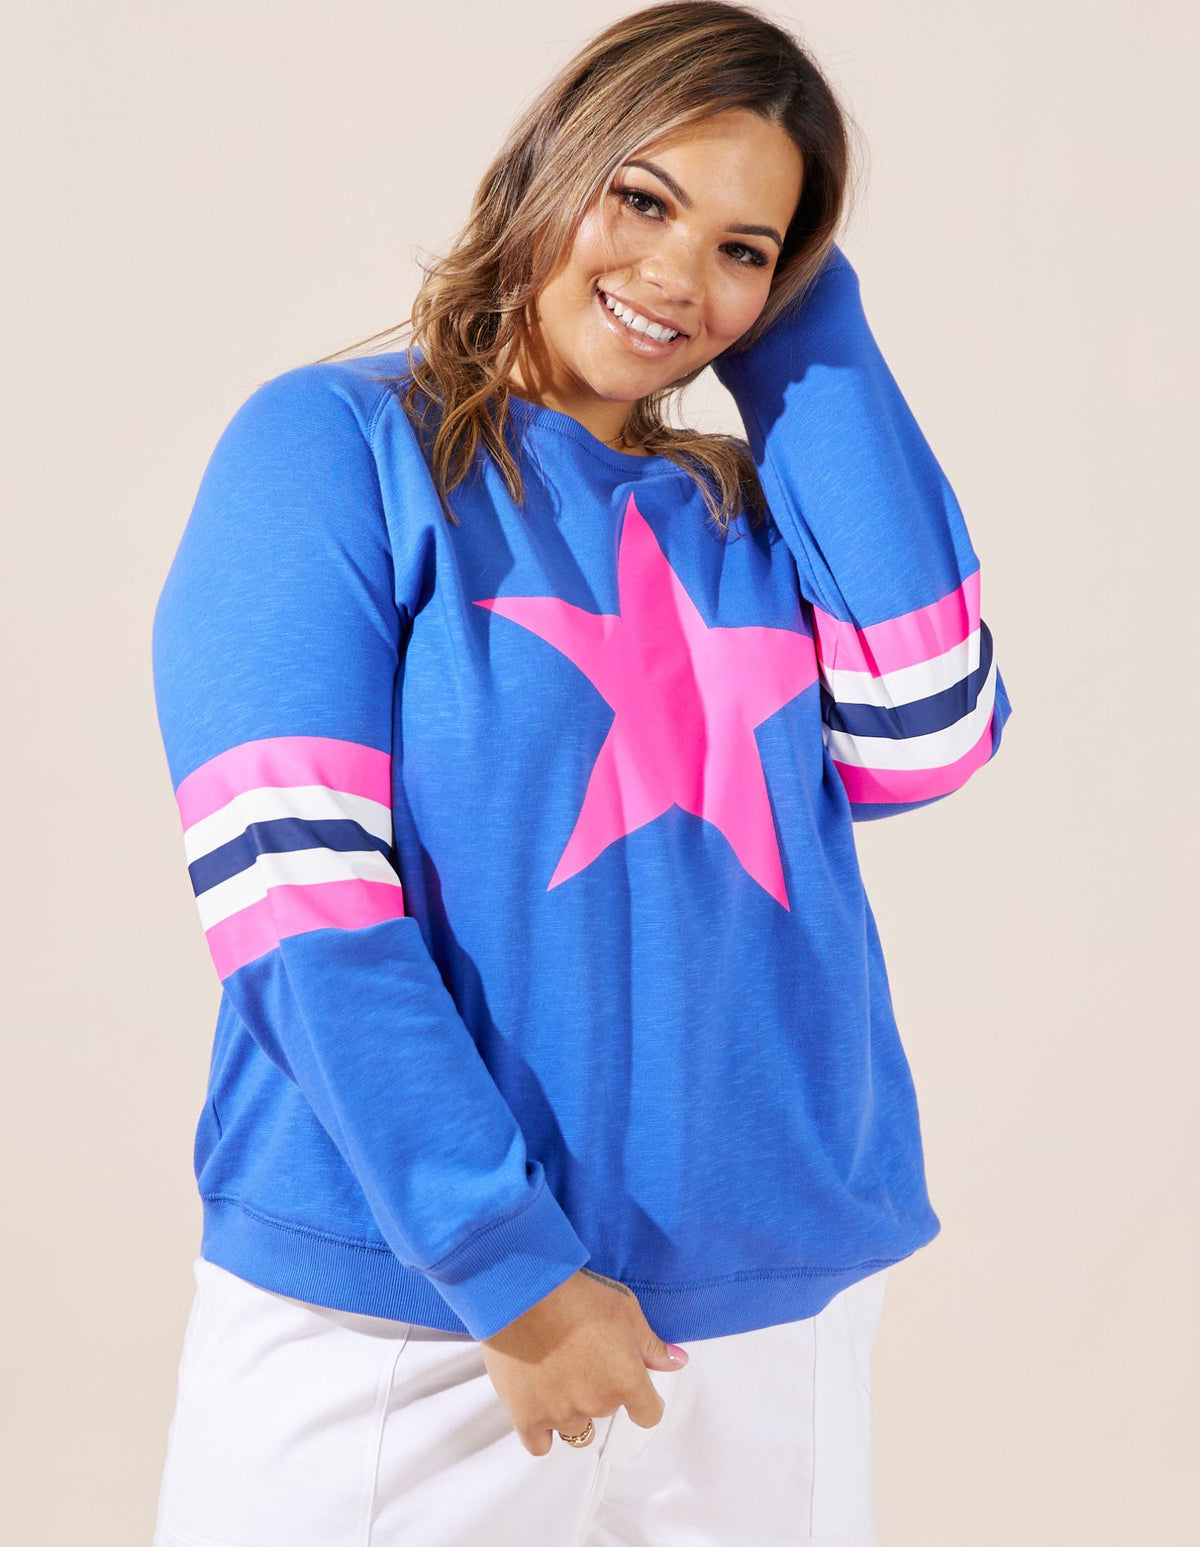 Holiday Sweater - Cobalt/Pink Star - Jovie The Label